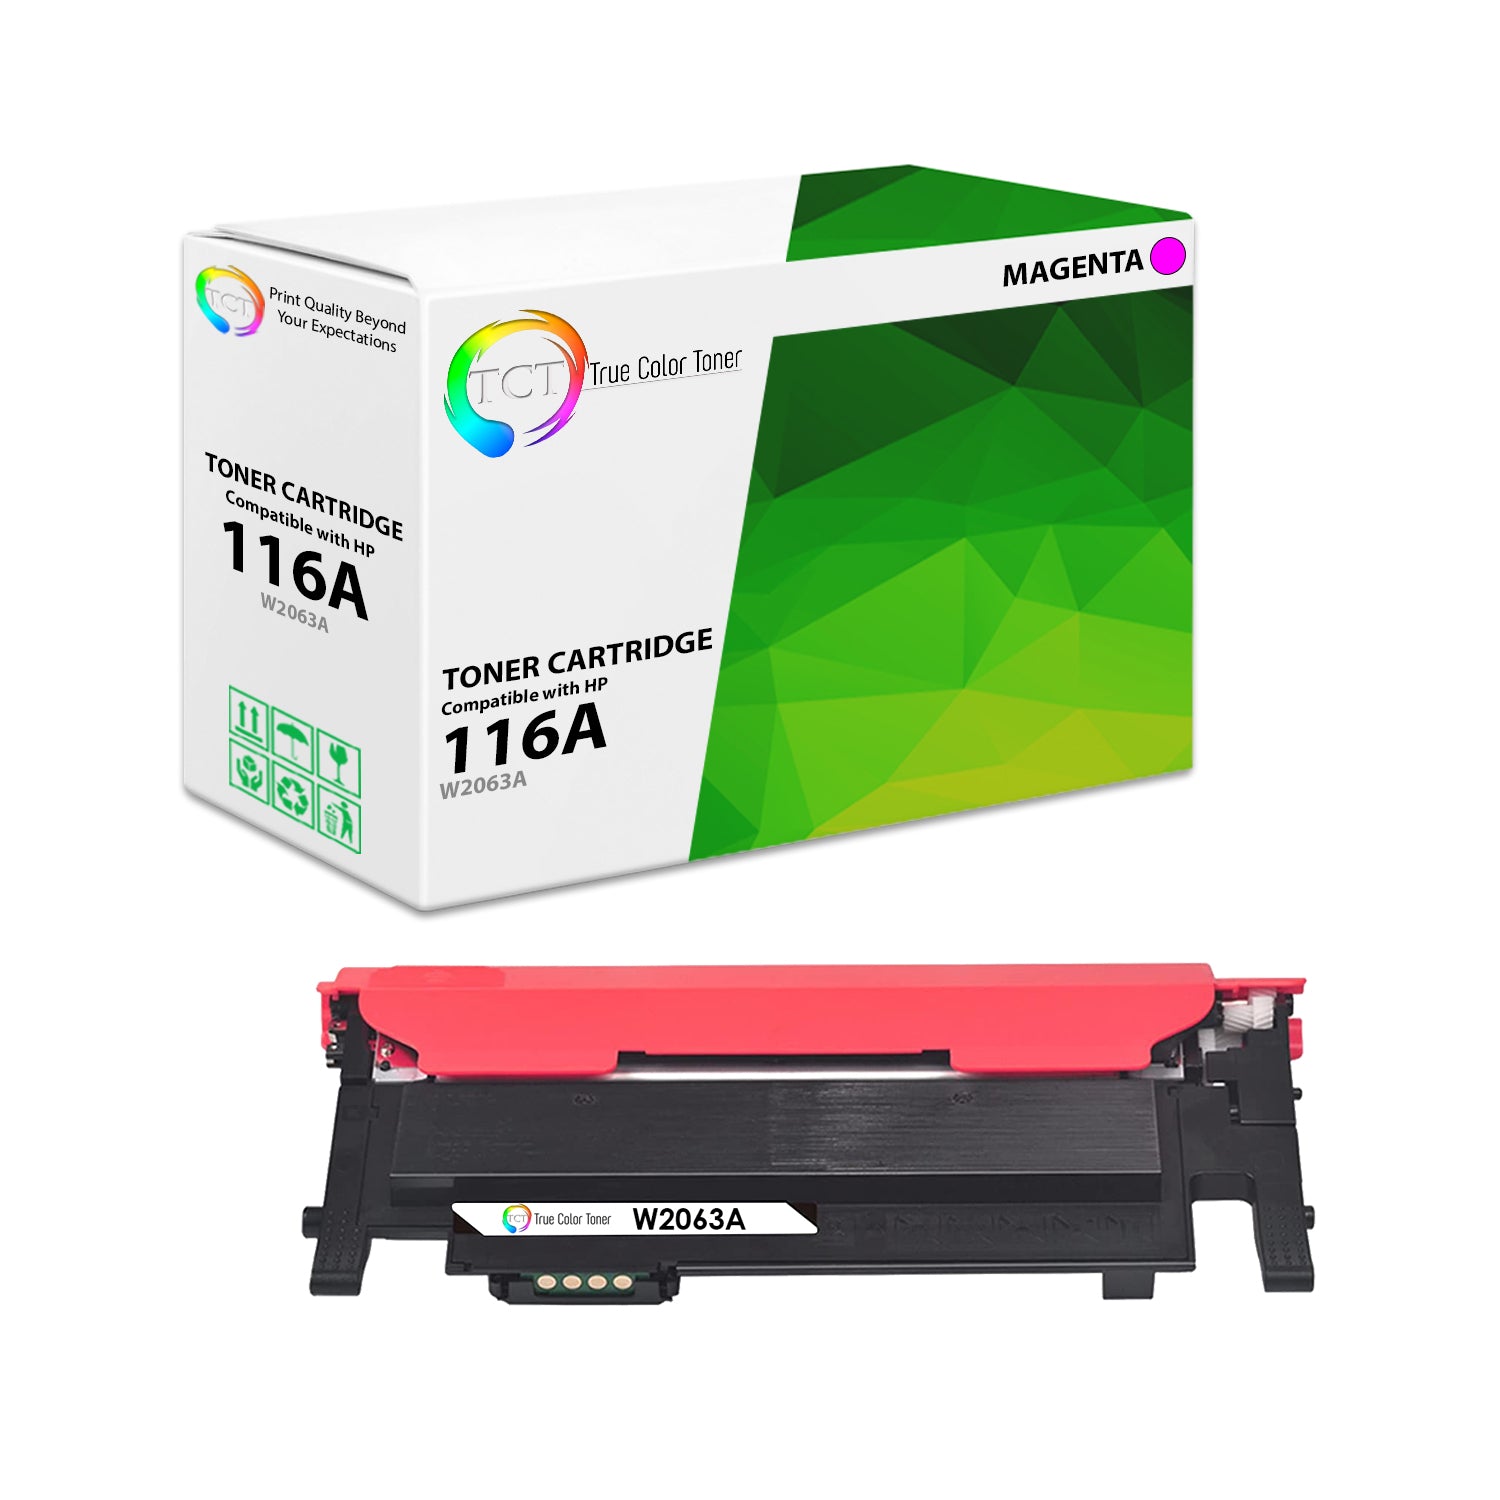 TCT Compatible Toner Cartridge Replacement for the HP 116A Series - 1 Pack Magenta